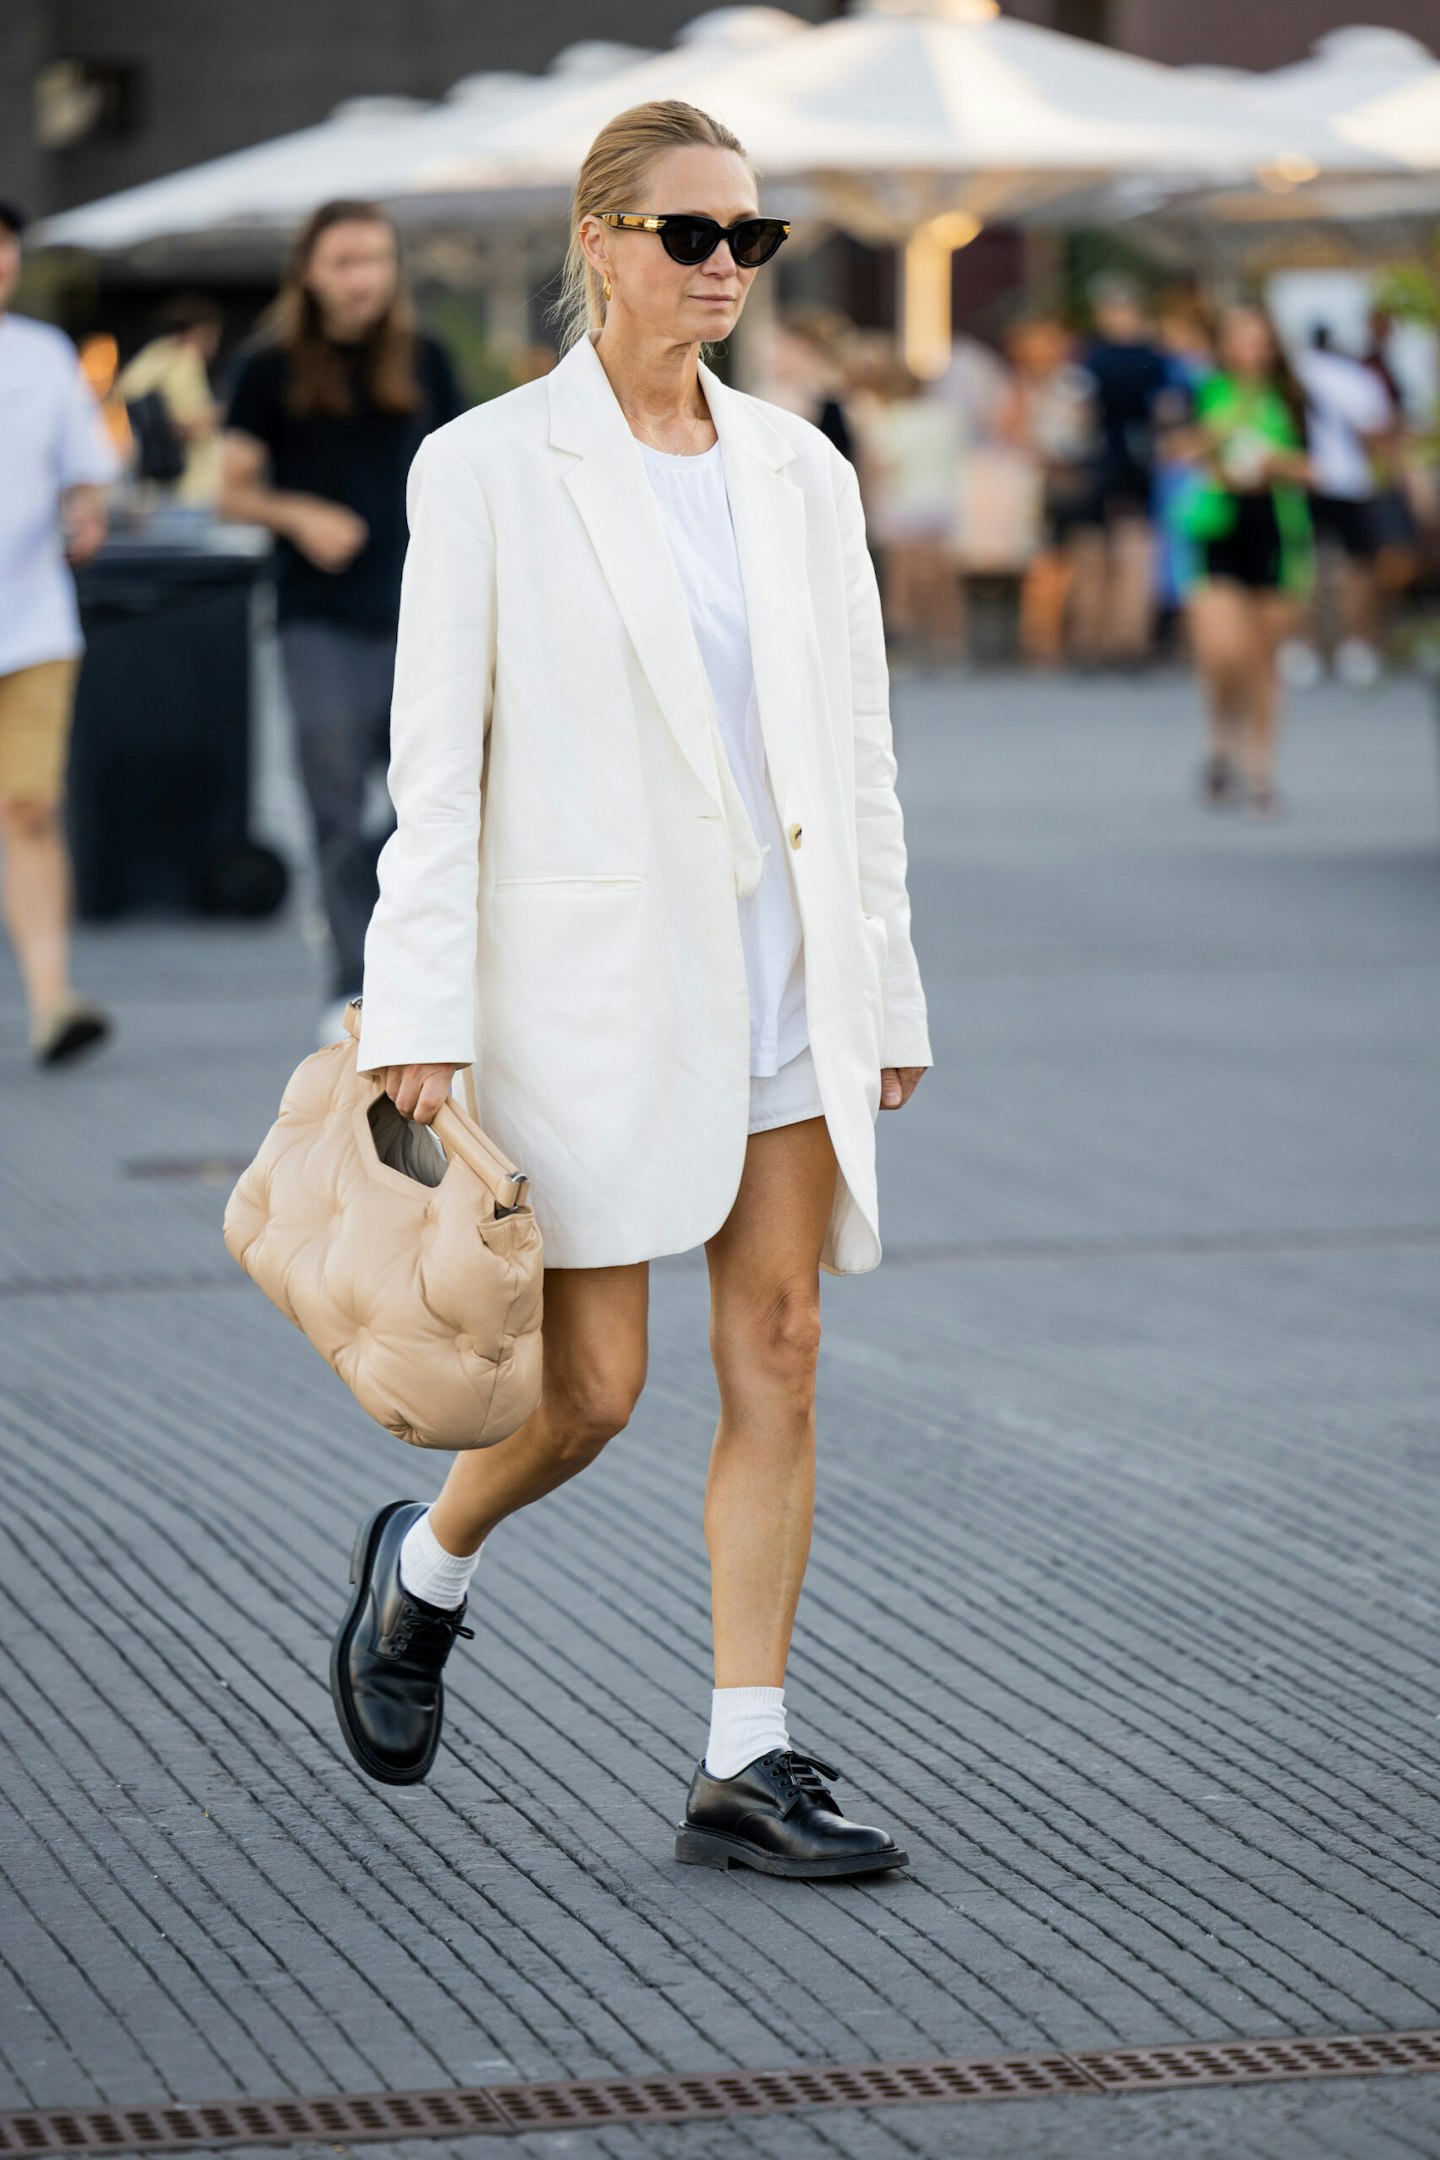 The Best White Outfits To Try For Spring/Summer 2023 | Fashion | Grazia